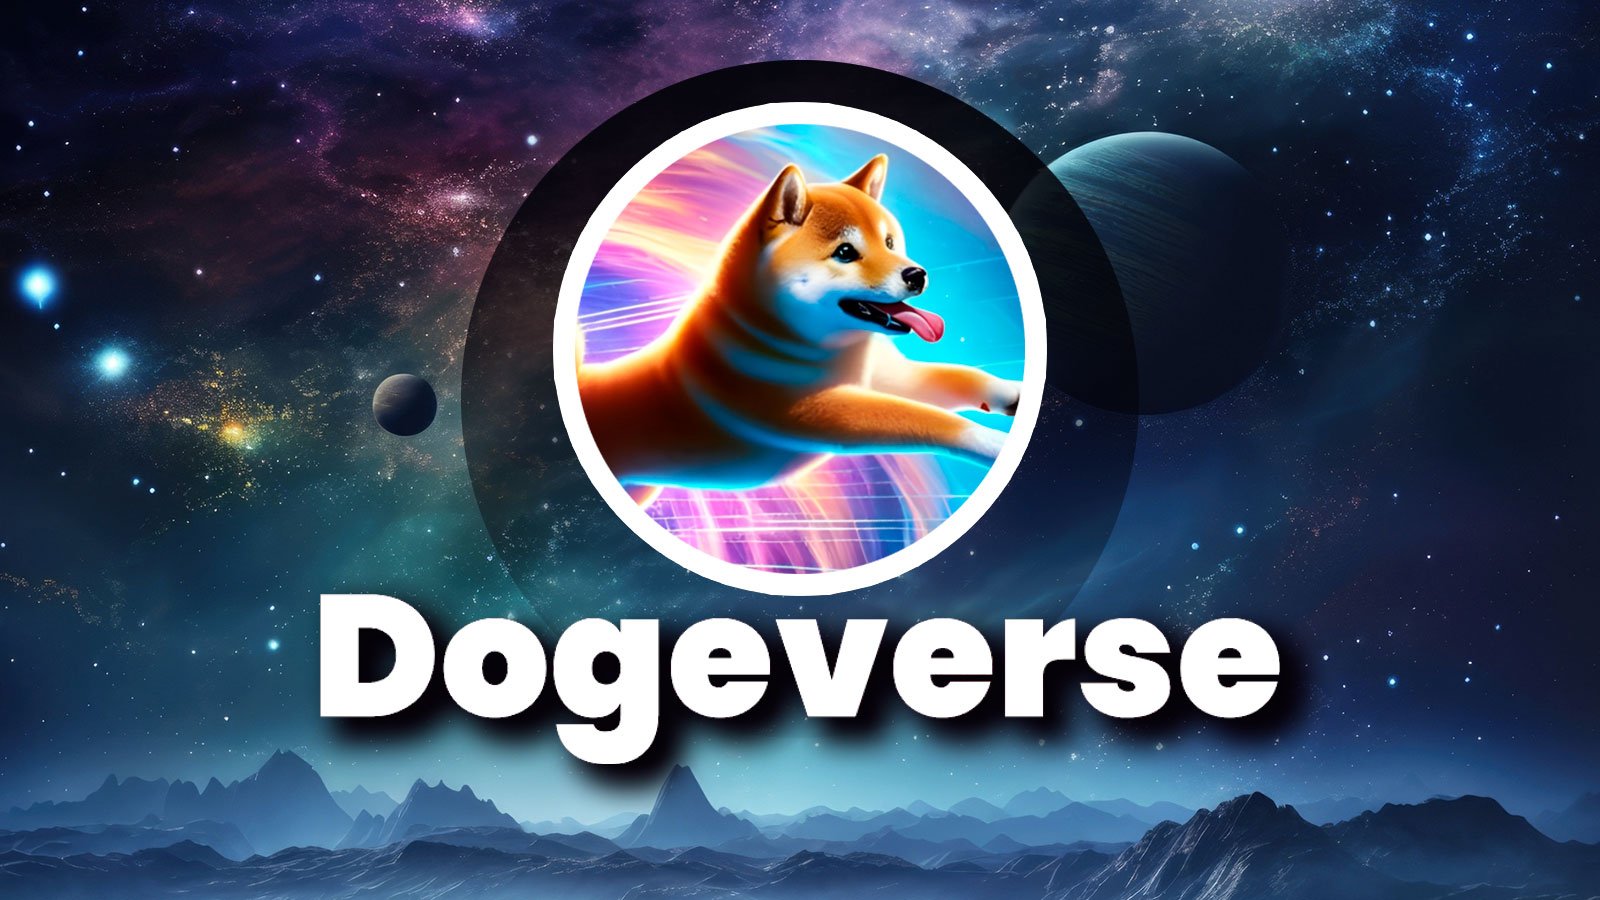 New Multi-Chain Meme Coin Dogeverse Goes Live and Raises $2M In First 48 Hours - What is $DOGEVERSE?